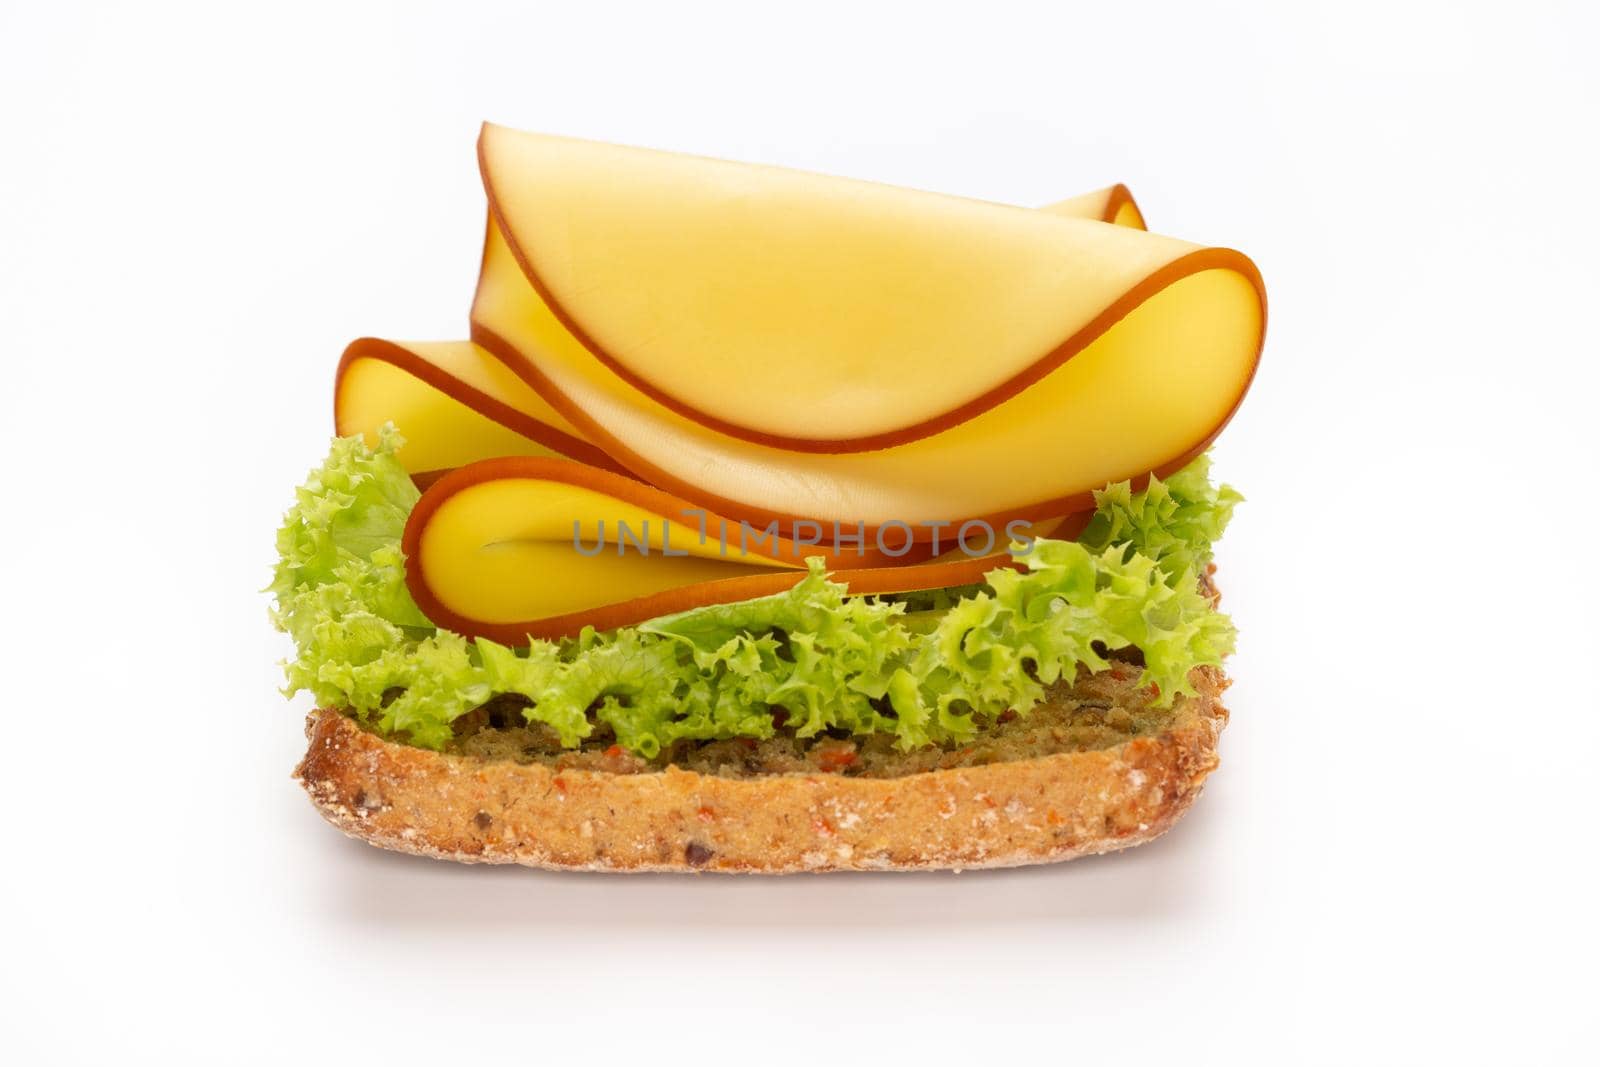 Sandwich with cheese on white background.